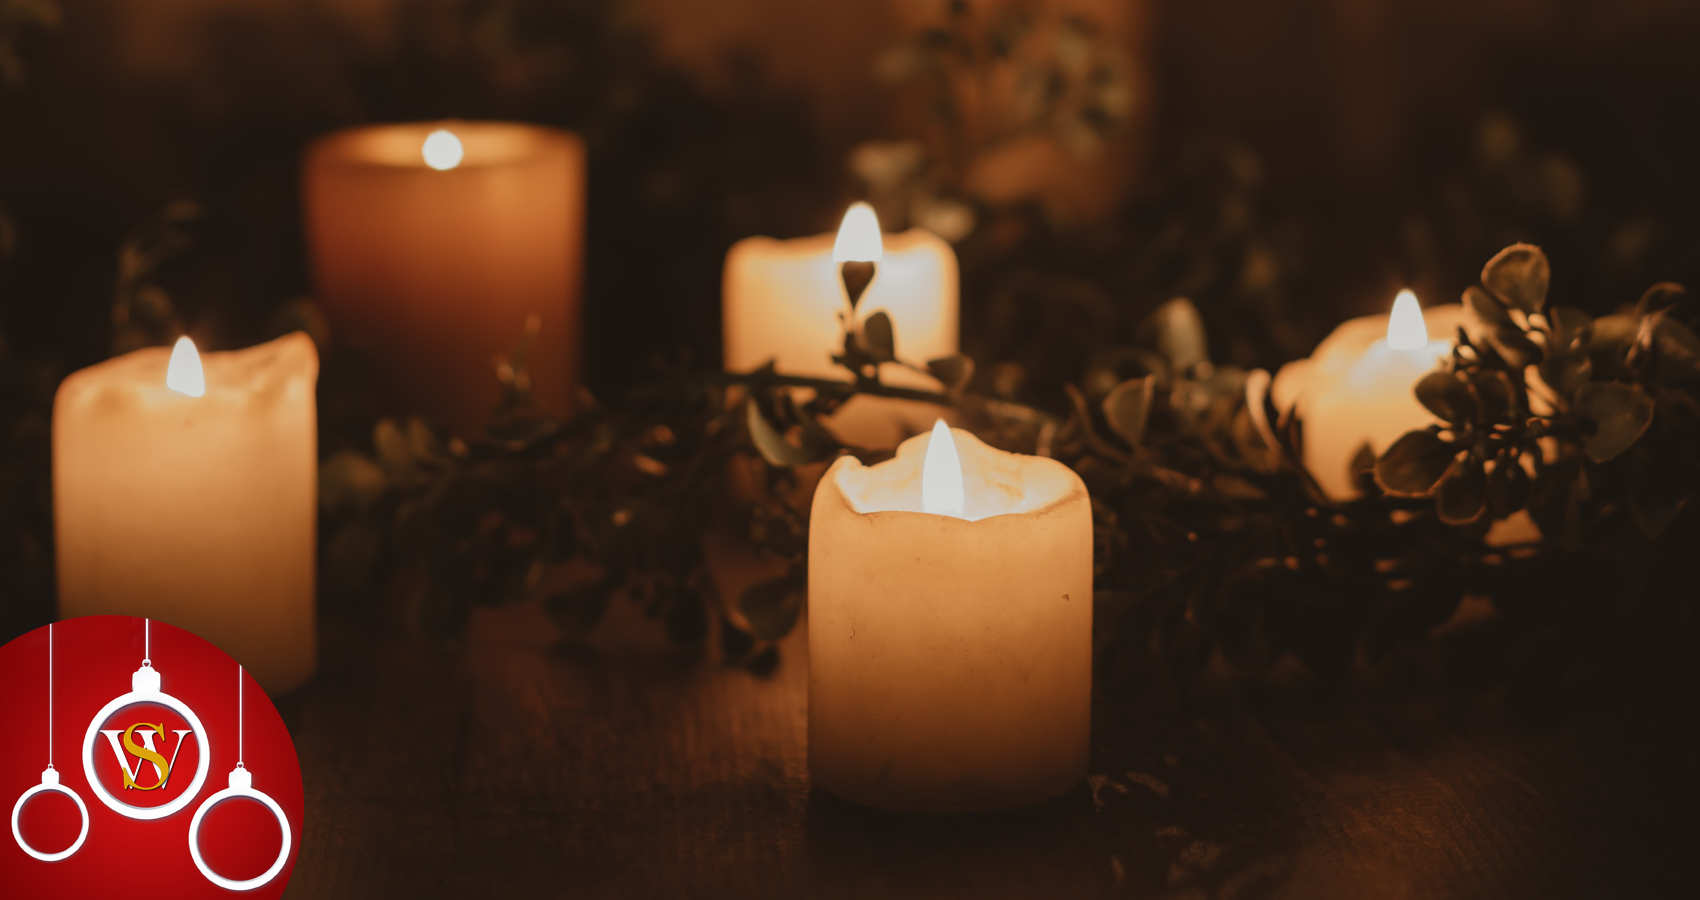 The Advent Candles, story by Monika Brewster at Spillwords.com